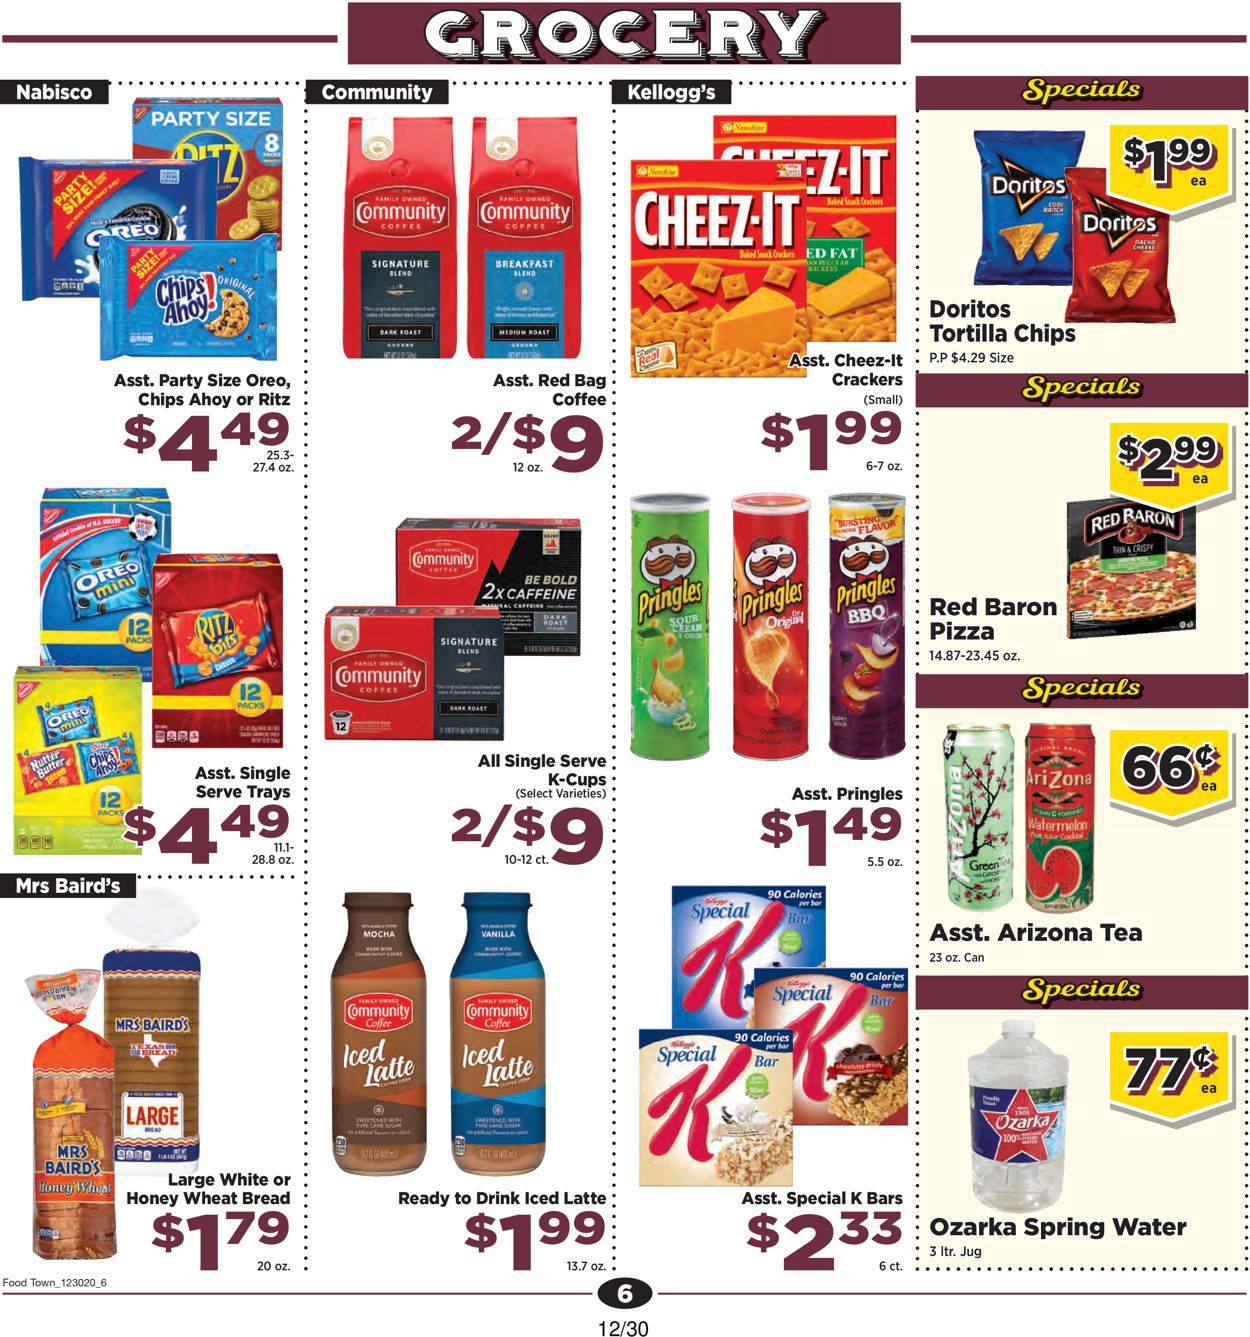 Food Town Specials & Grocery Ad Weekly Ad Circular - valid 12/30-01/05/2021 (Page 6)